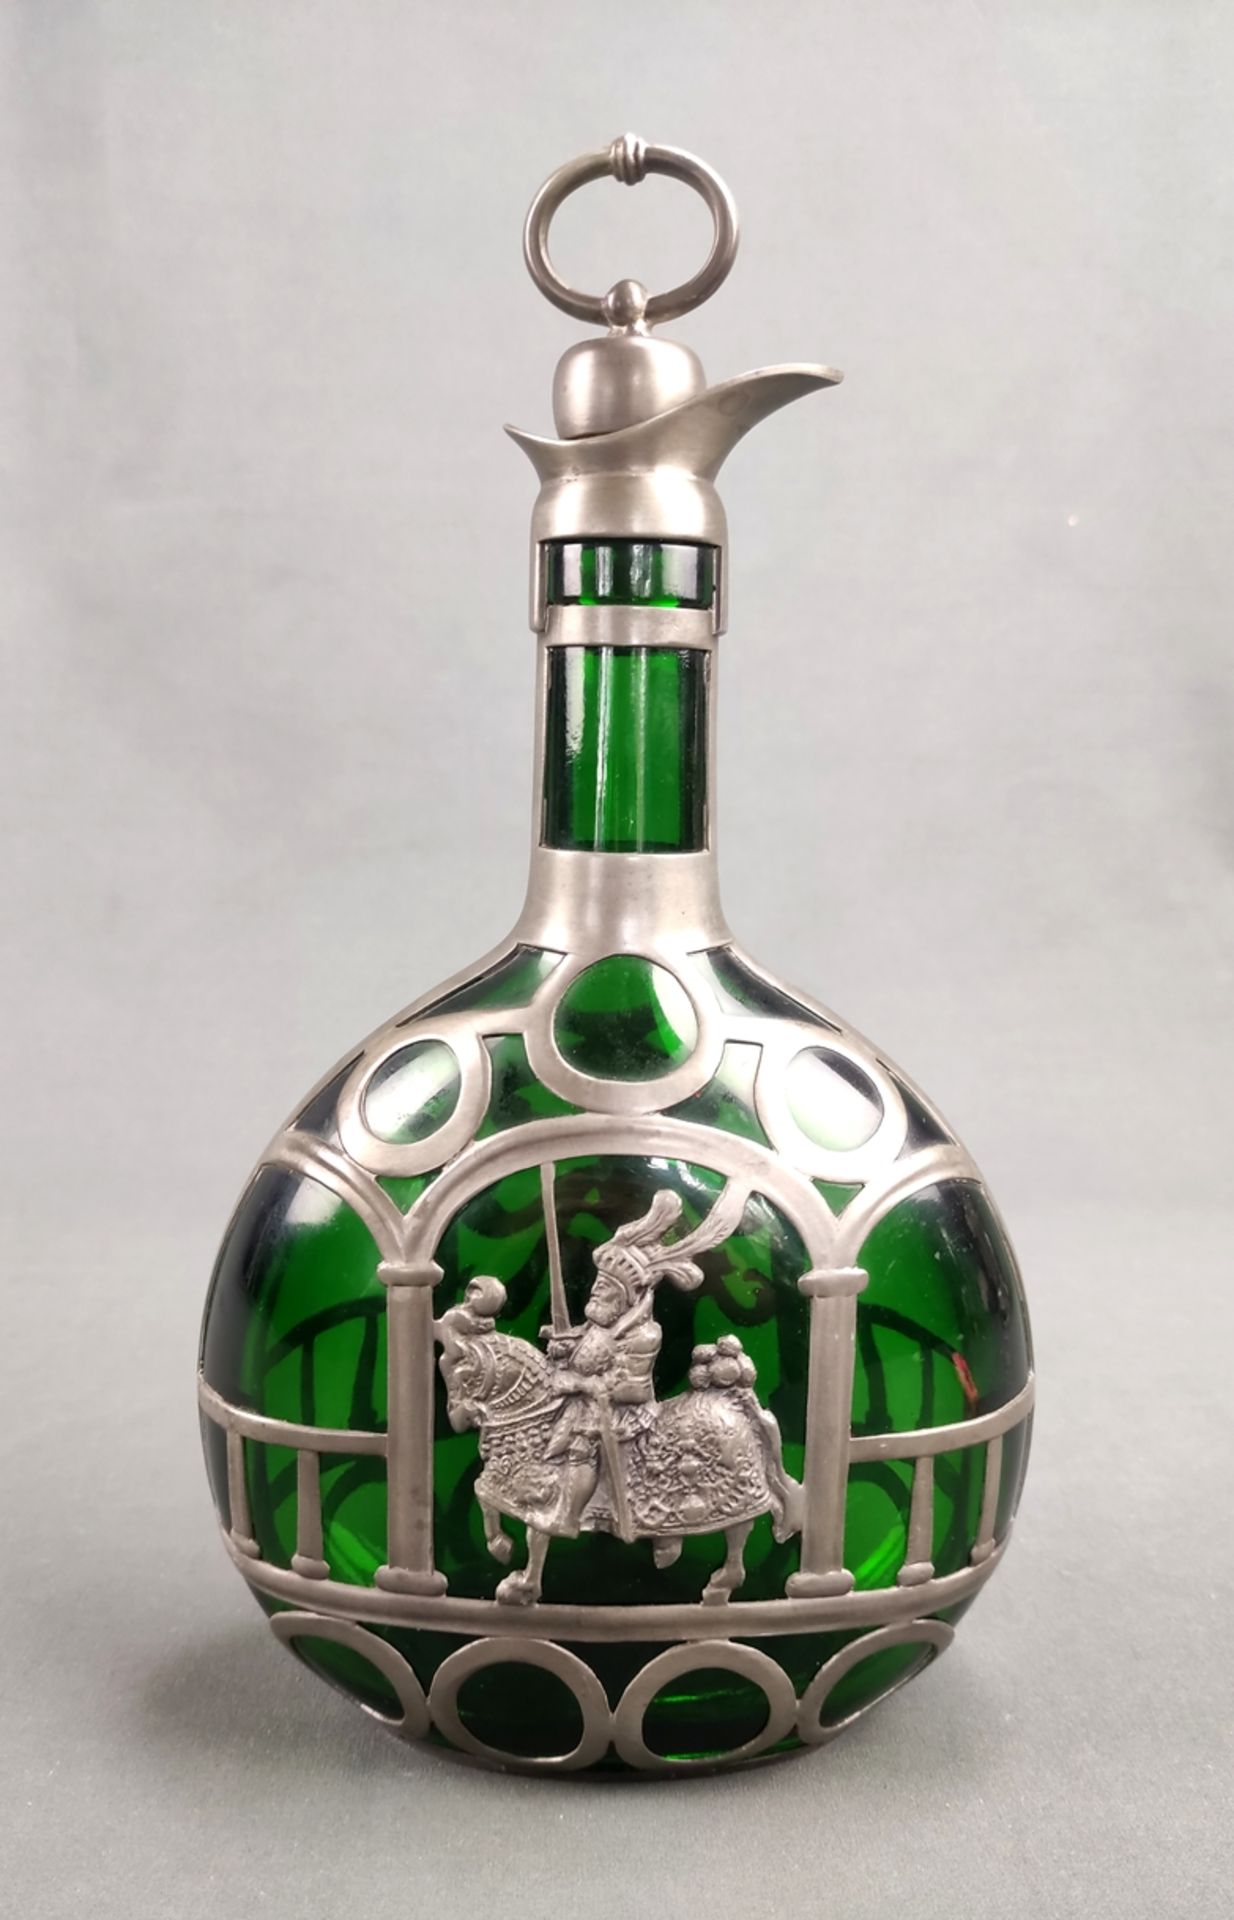 Bottle with decorative pewter frame, green glass, with cork stopper, on one side decorated with kni - Image 2 of 3